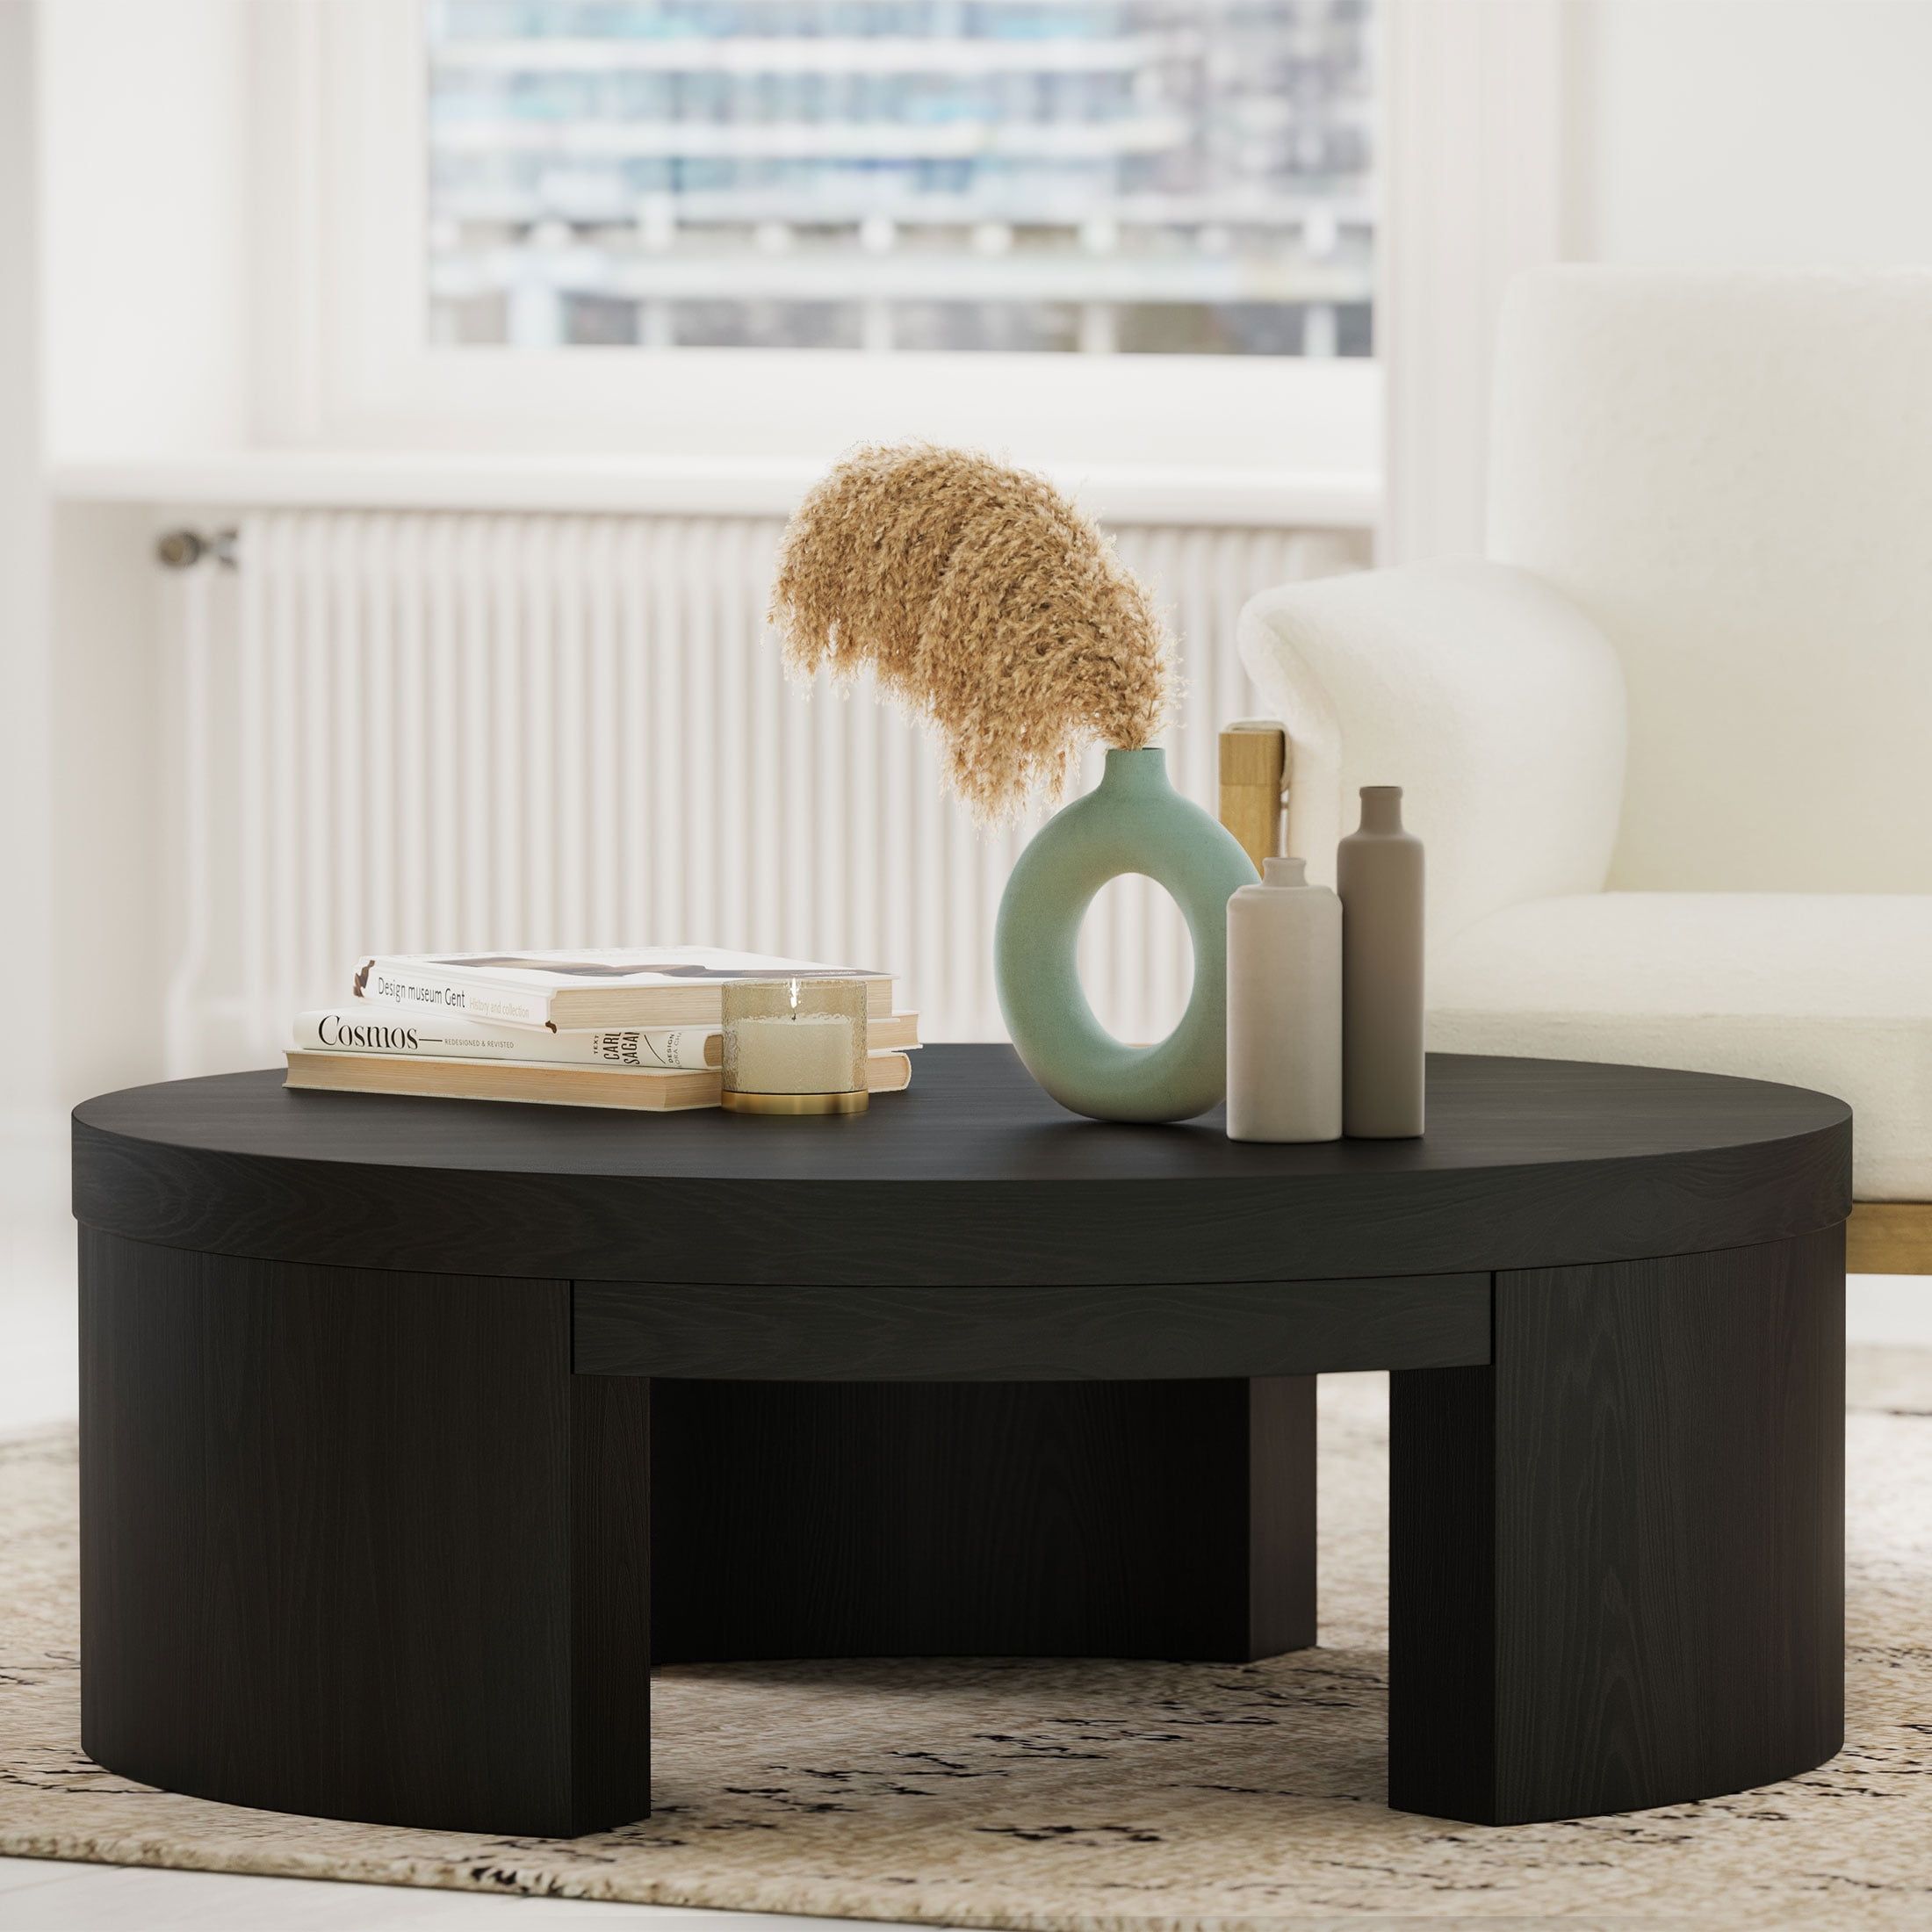 Beautiful Mod Round Coffee Tabledrew Barrymore, Warm Honey Finish –  Walmart In Modern Wooden X Design Coffee Tables (View 6 of 15)